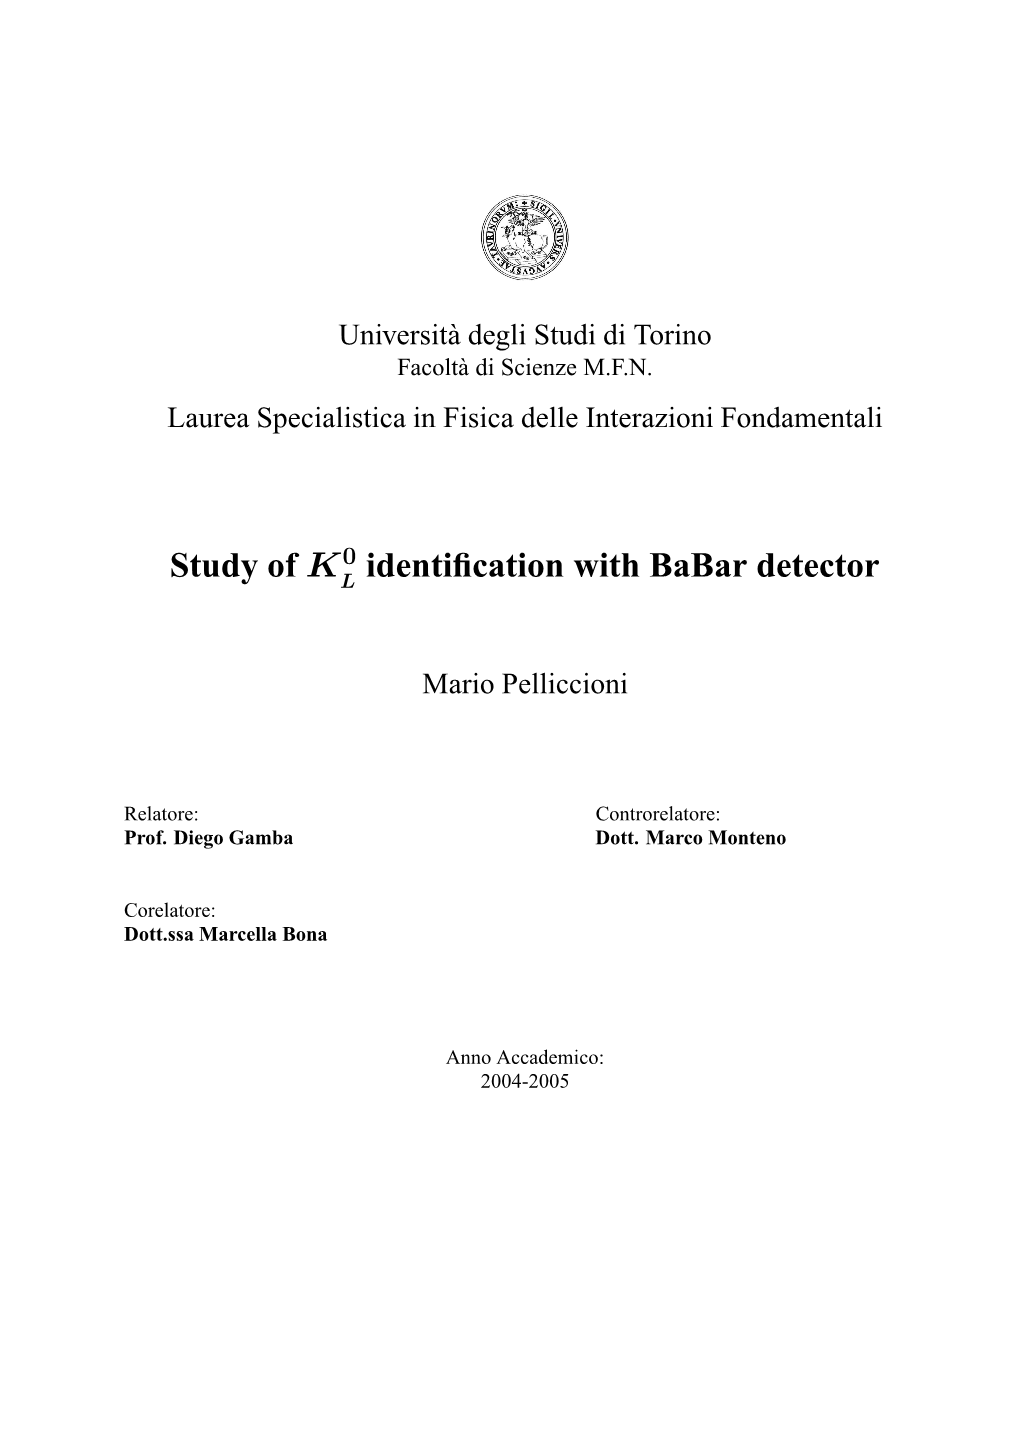 Study of K Identification with Babar Detector